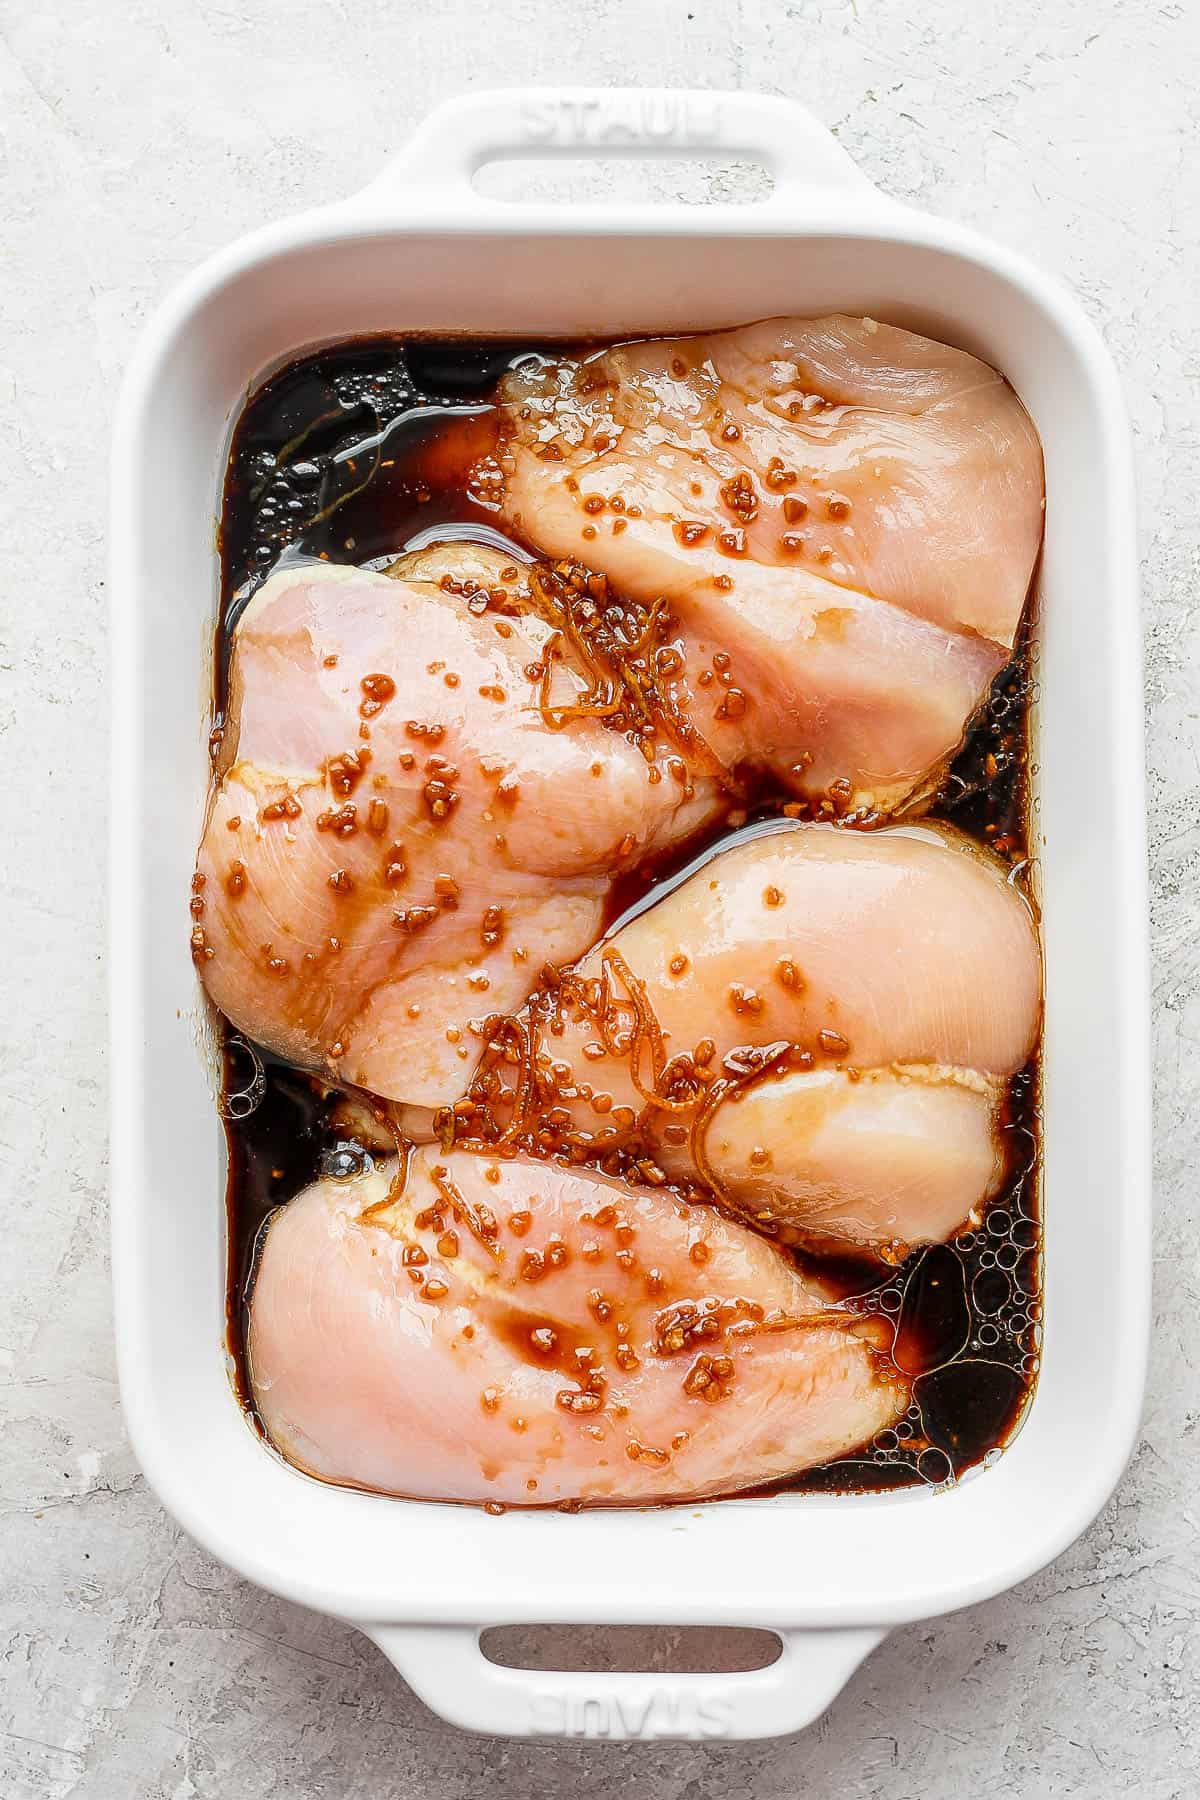 Four raw chicken breasts in a marinade. 